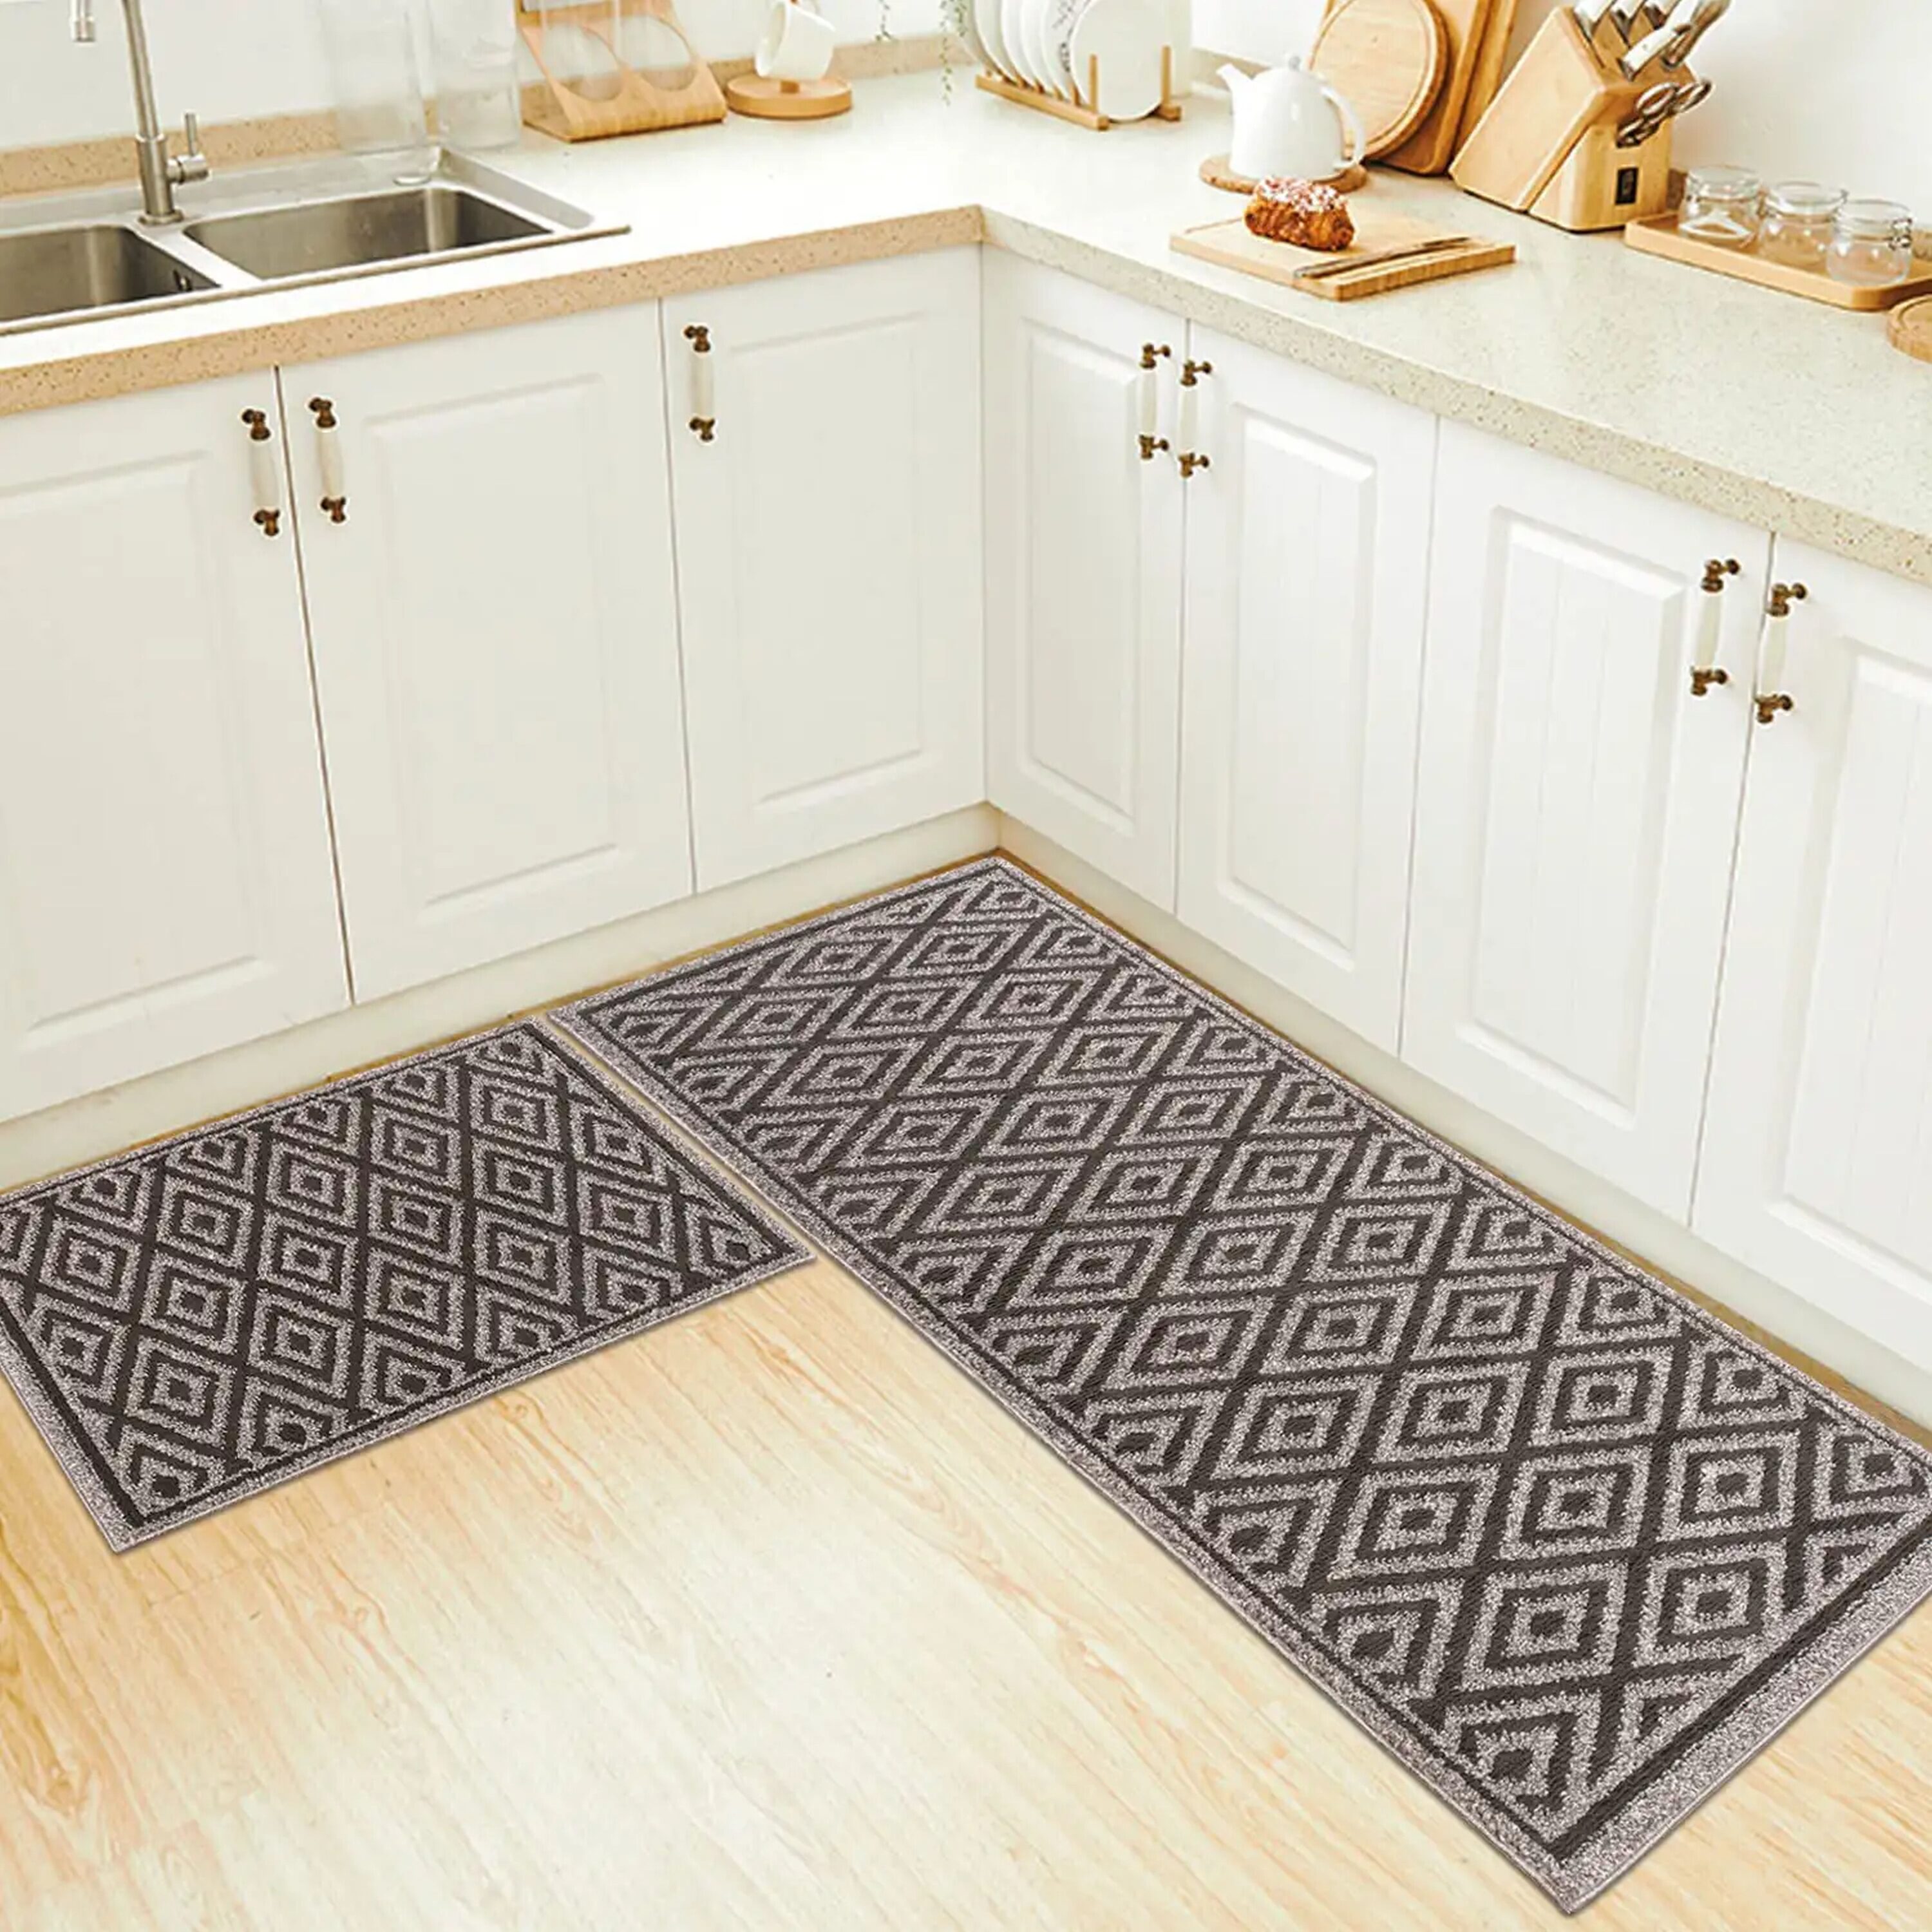 The Sofia Rugs Sofihas 2 Piece Kitchen Rug Sets 60in x 24in x 35in x 24in Kitchen  Floor Mats 100% Shag Polypropylene Farmhouse Washable Kitchen Rugs and Mats  with Non Skid Rubber